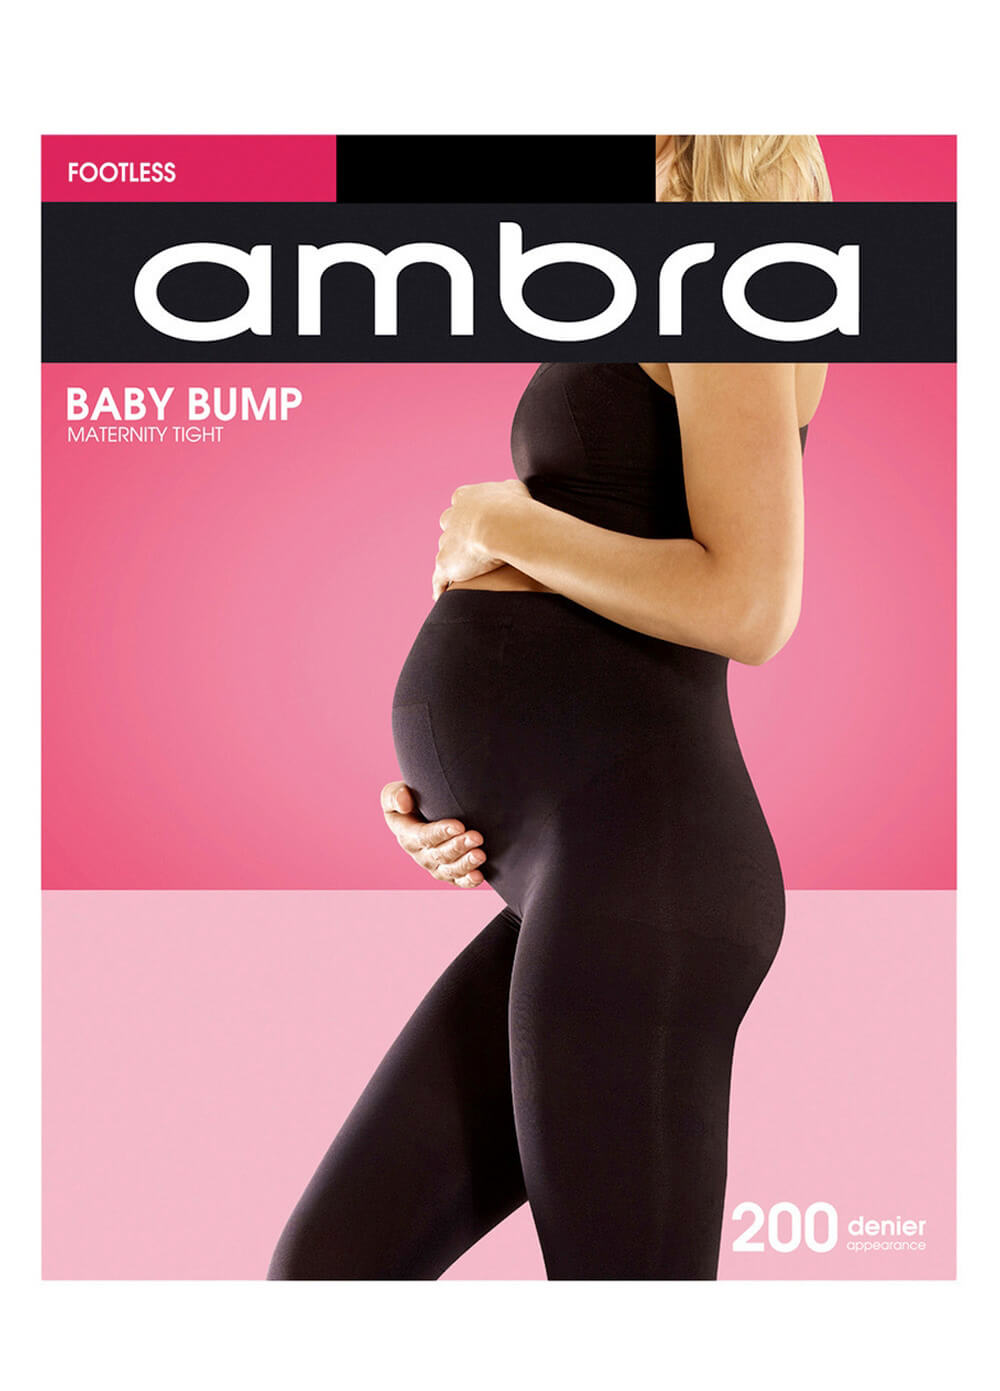 Baby Bump 200 Denier Opaque Maternity Footless Tights by Ambra